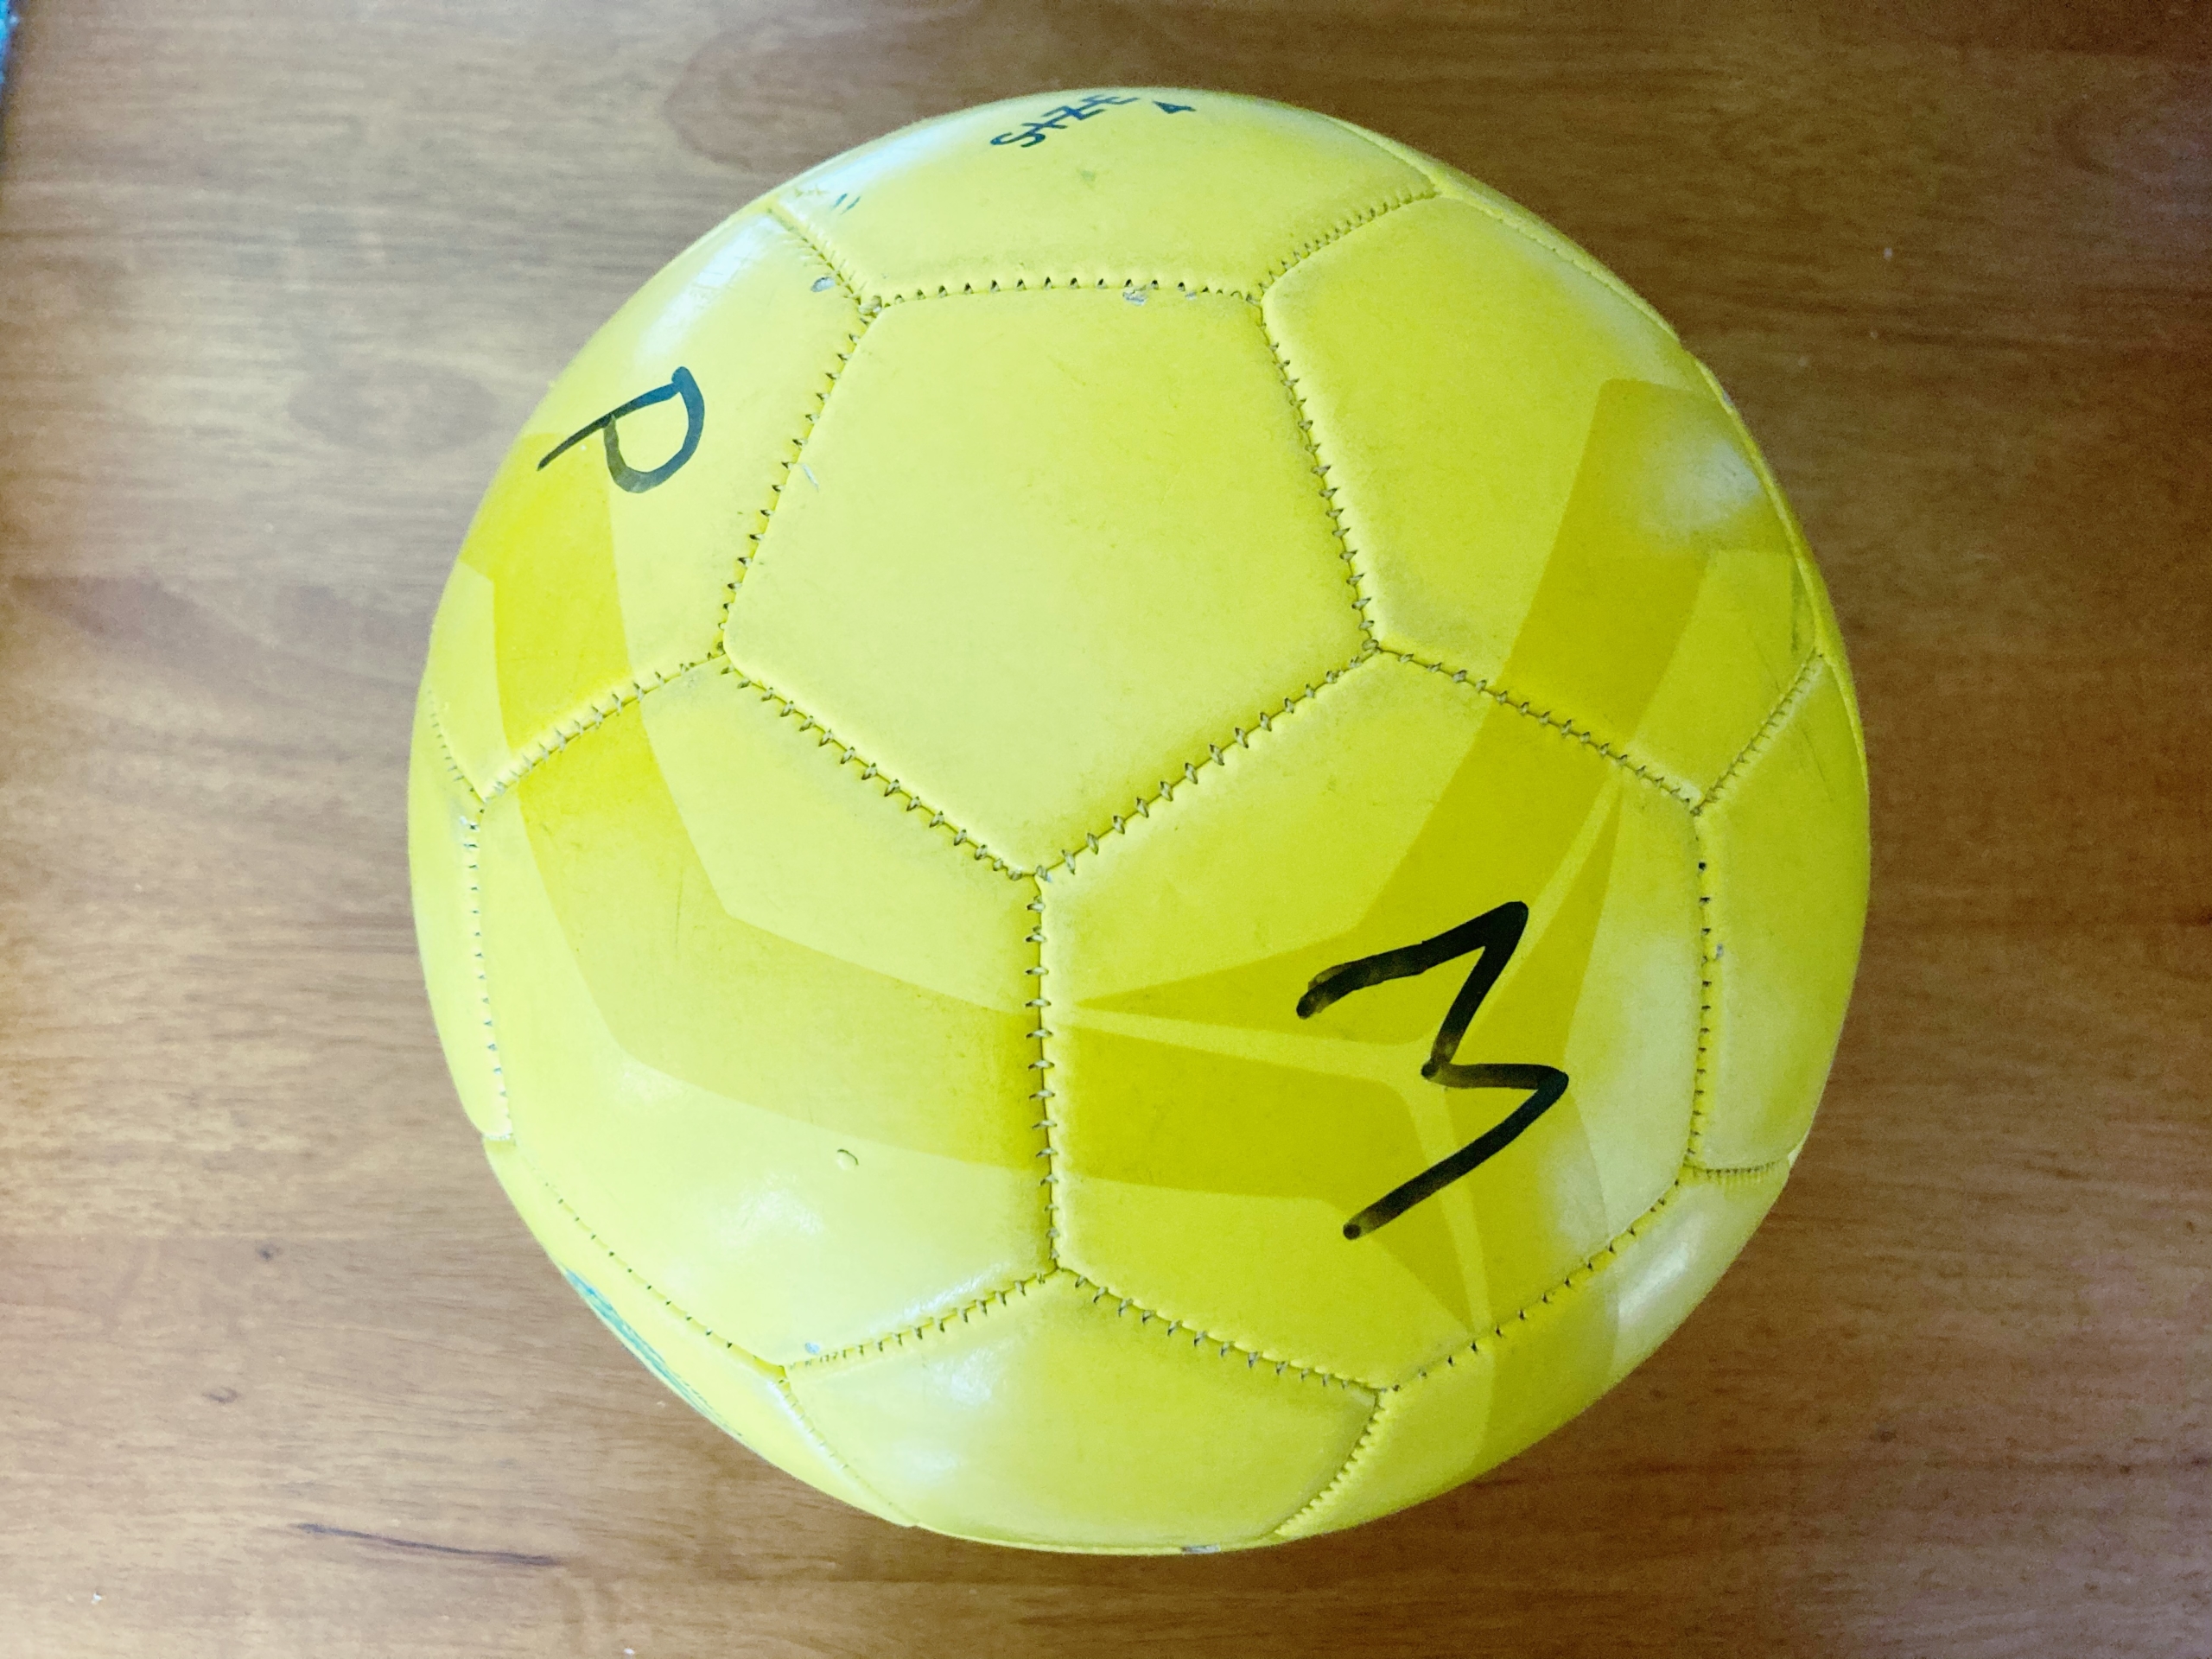 Yellow soccer ball with individual letters written on it